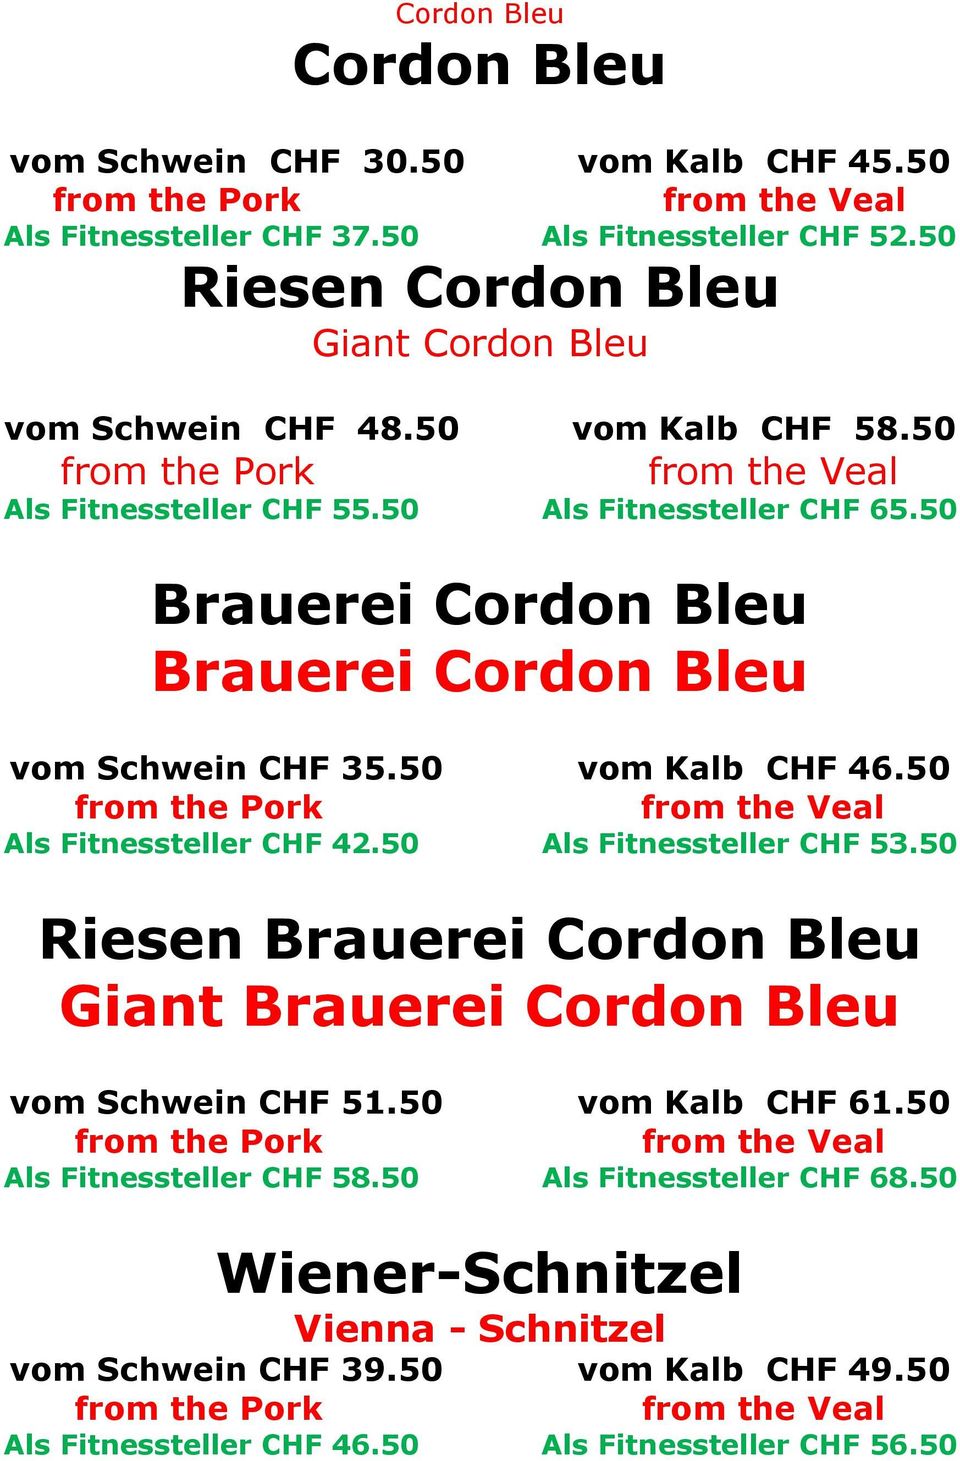 50 Brauerei Cordon Bleu Brauerei Cordon Bleu vom Schwein CHF 35.50 vom Kalb CHF 46.50 from the Pork from the Veal Als Fitnessteller CHF 42.50 Als Fitnessteller CHF 53.